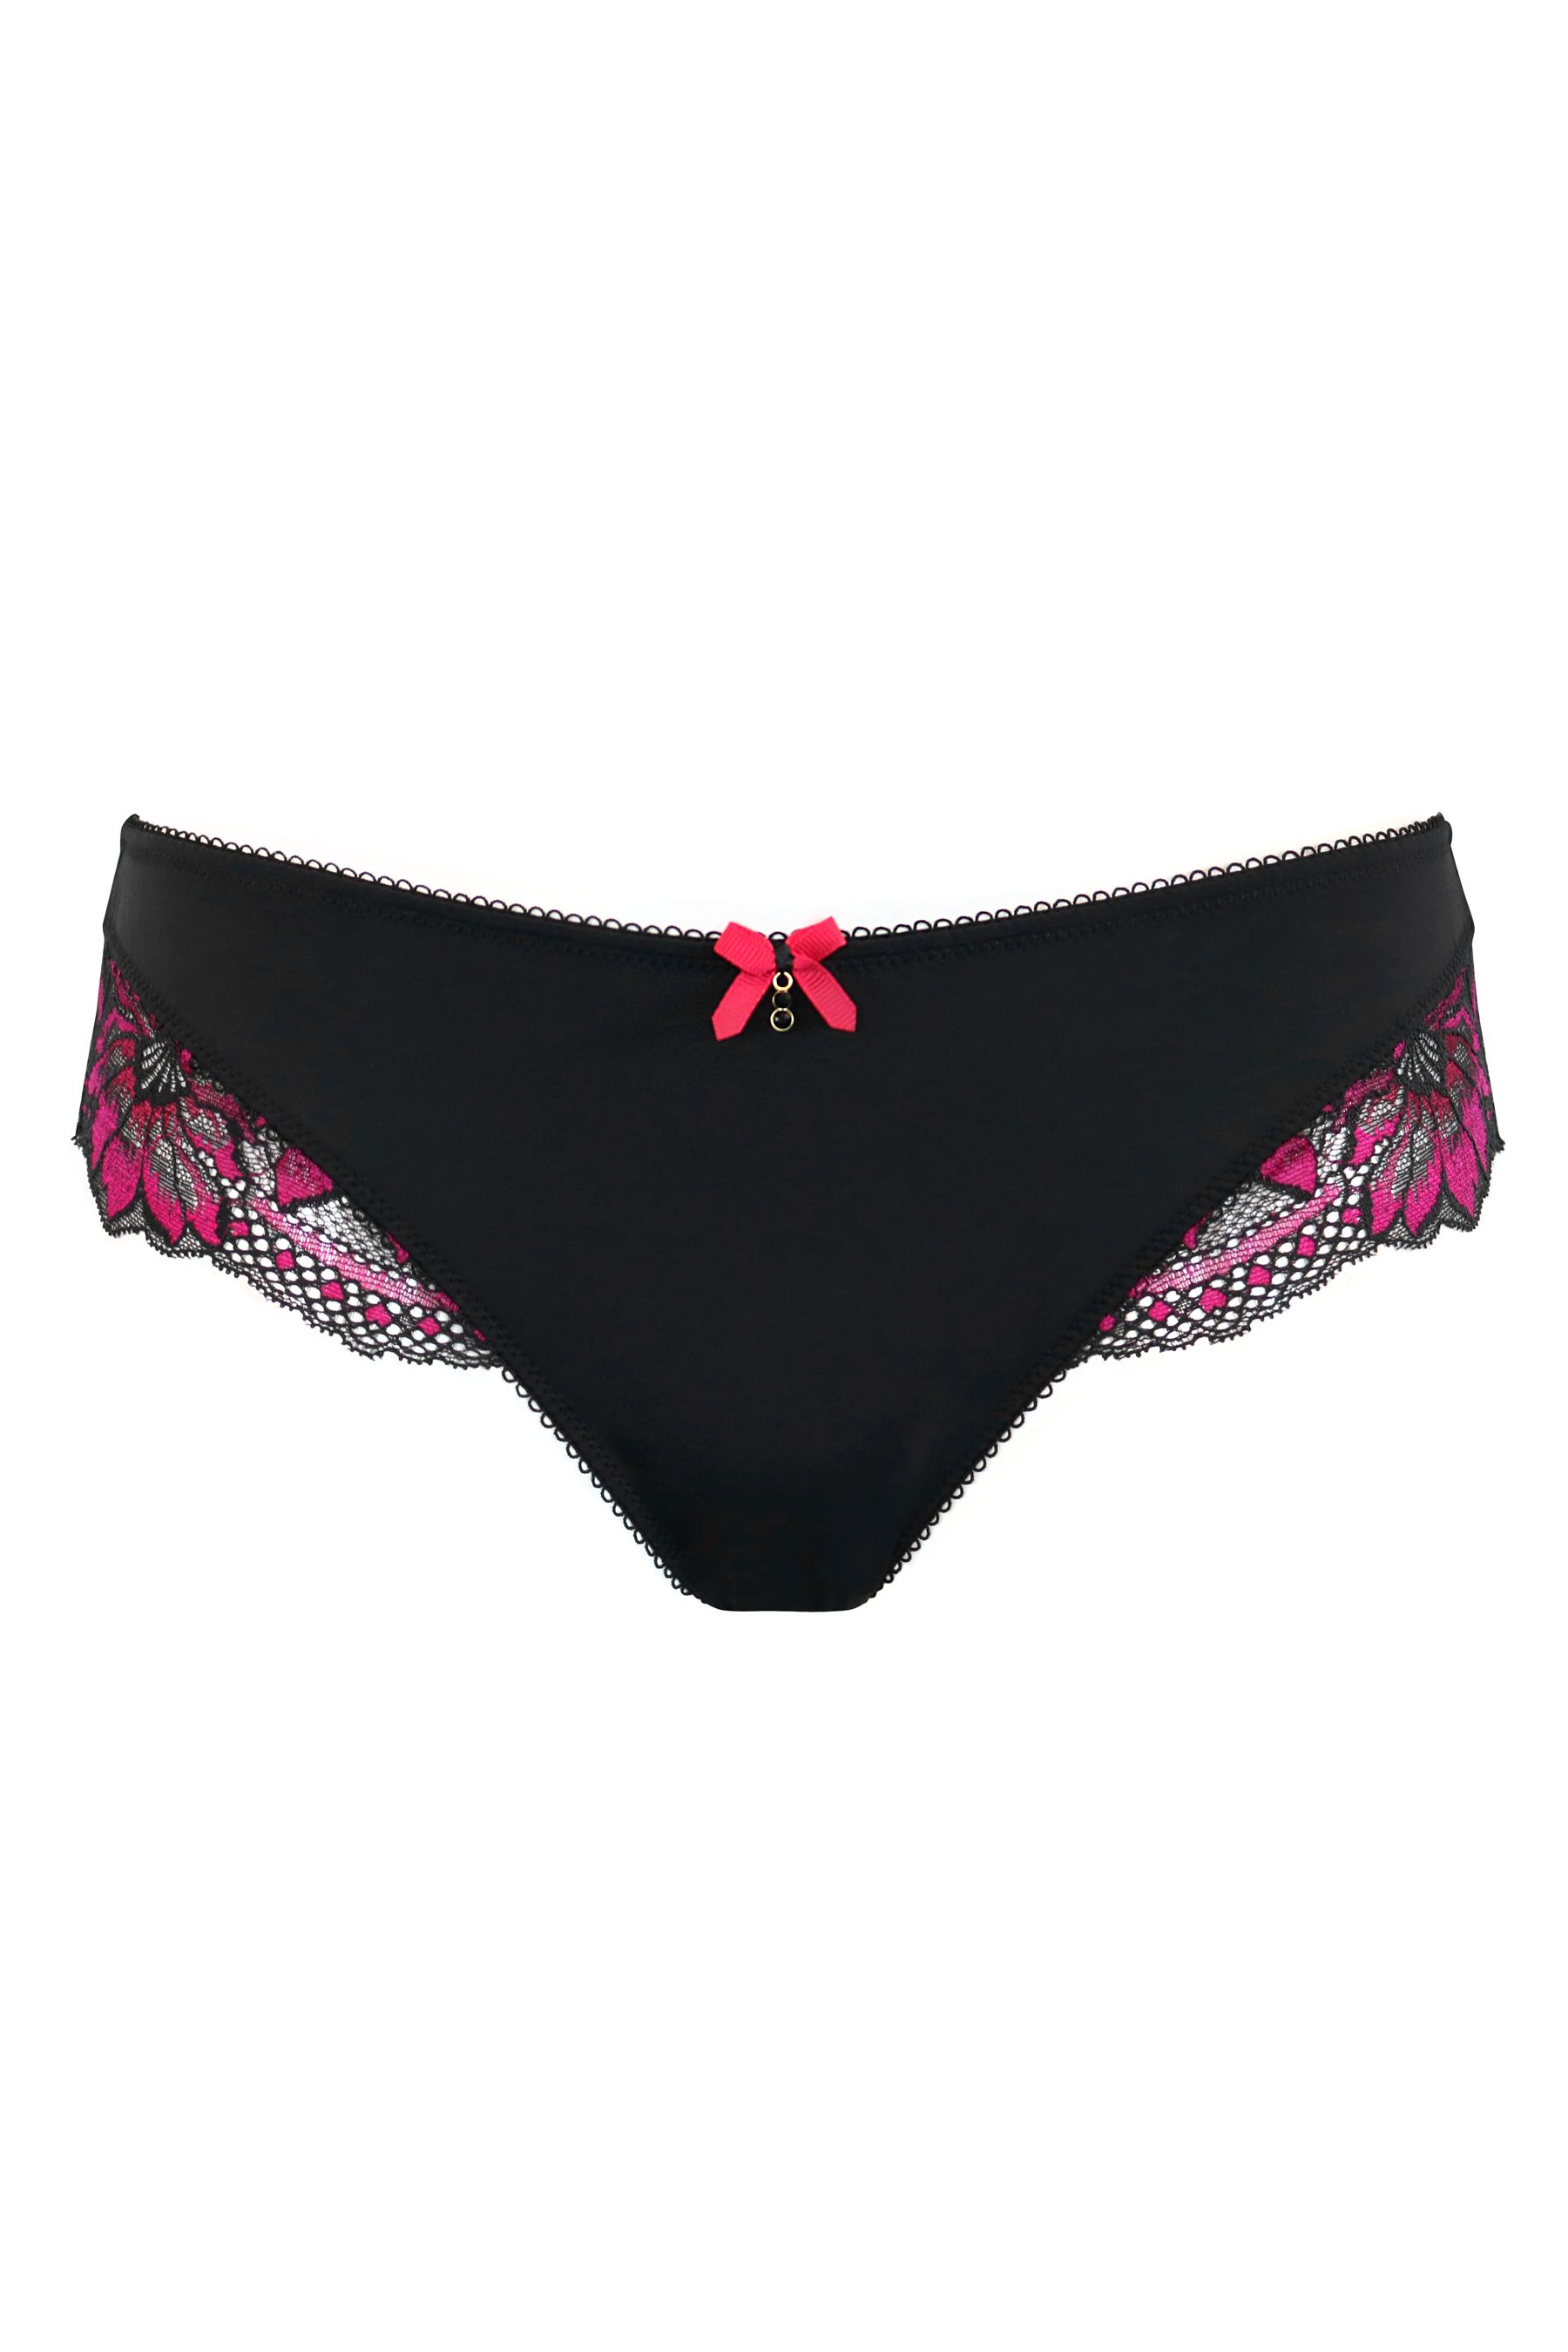 Buy Pour Moi Black Brief J'Adore Knicker from the Next UK online shop